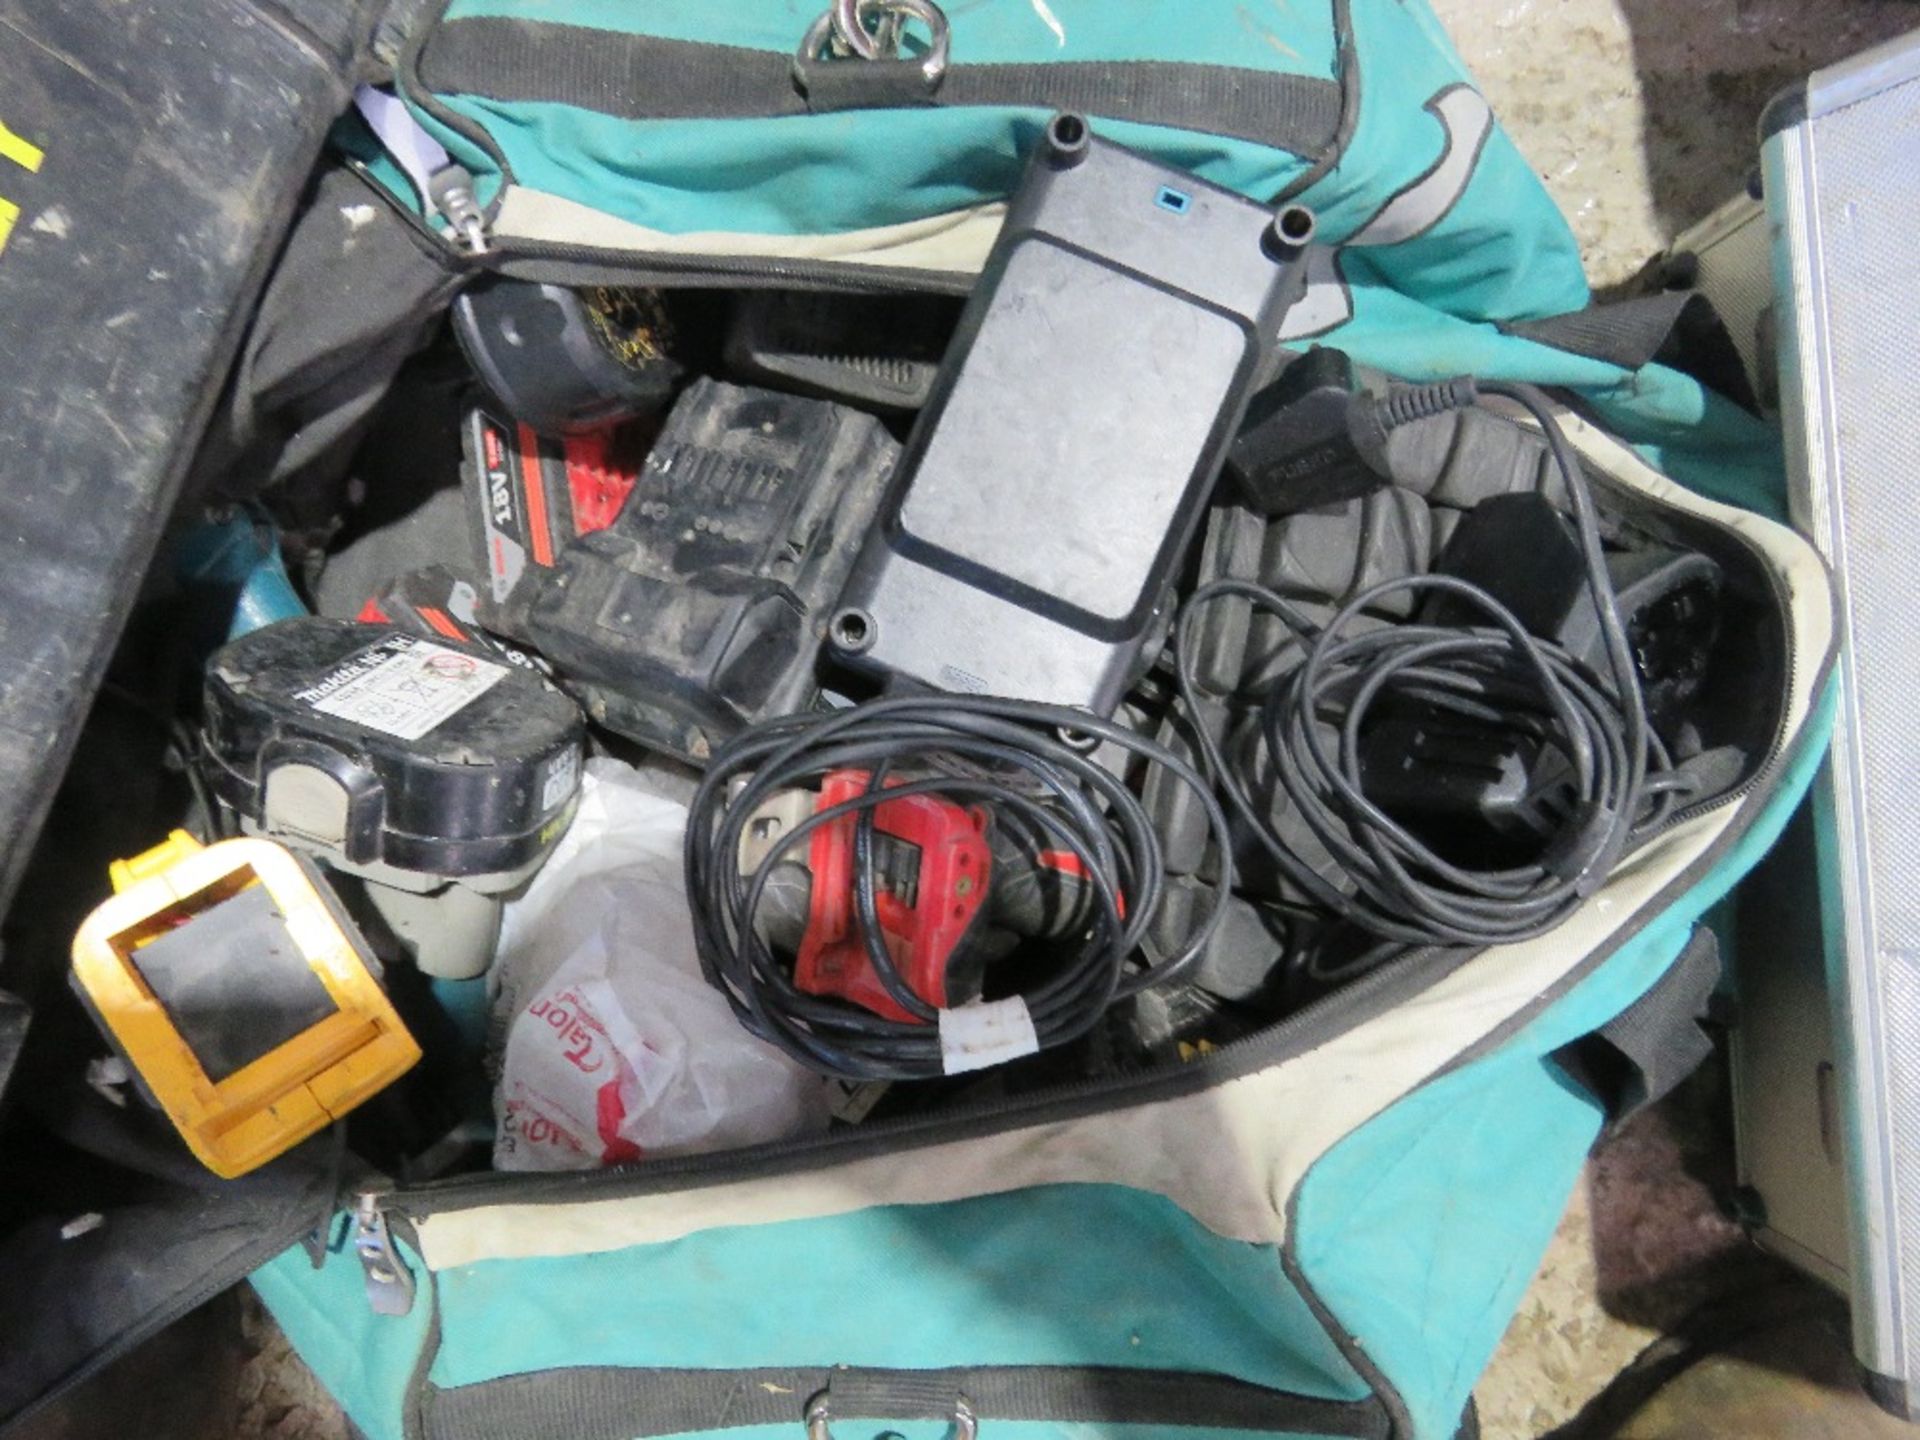 BAG AND TOOL BOX OF BATTERY TOOL ITEMS ETC. - Image 3 of 5